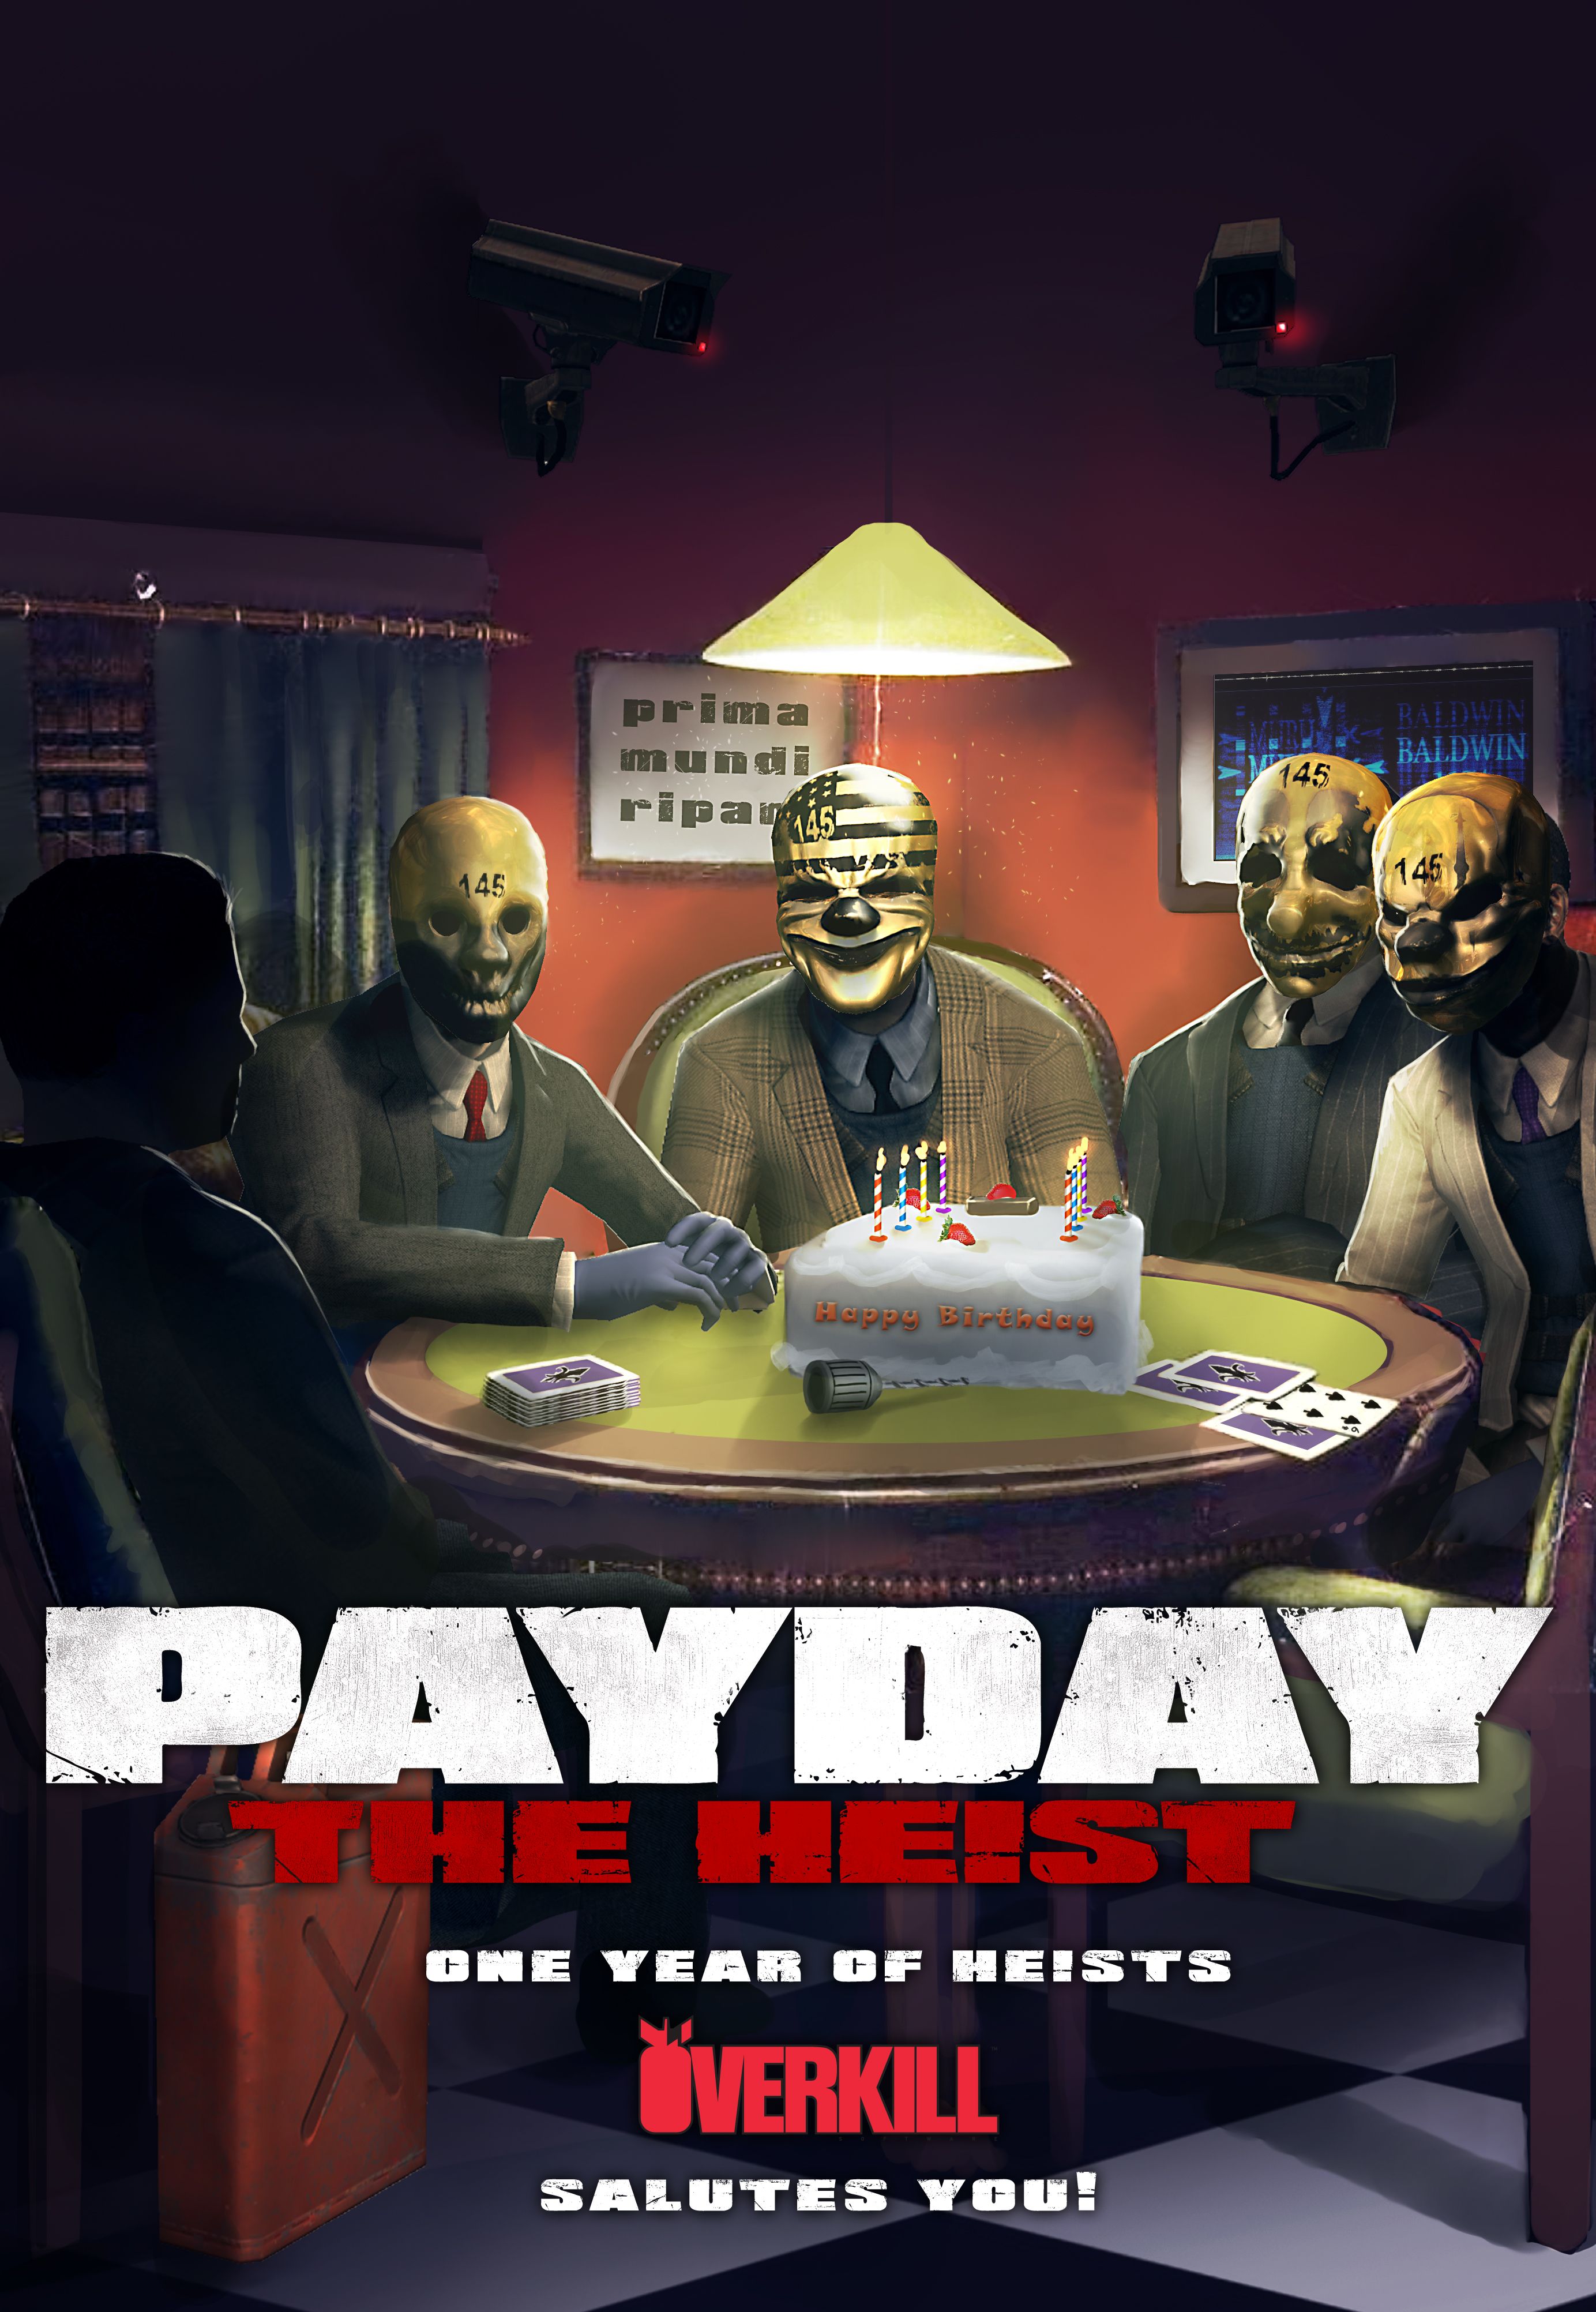 payday 2 free download pc full version